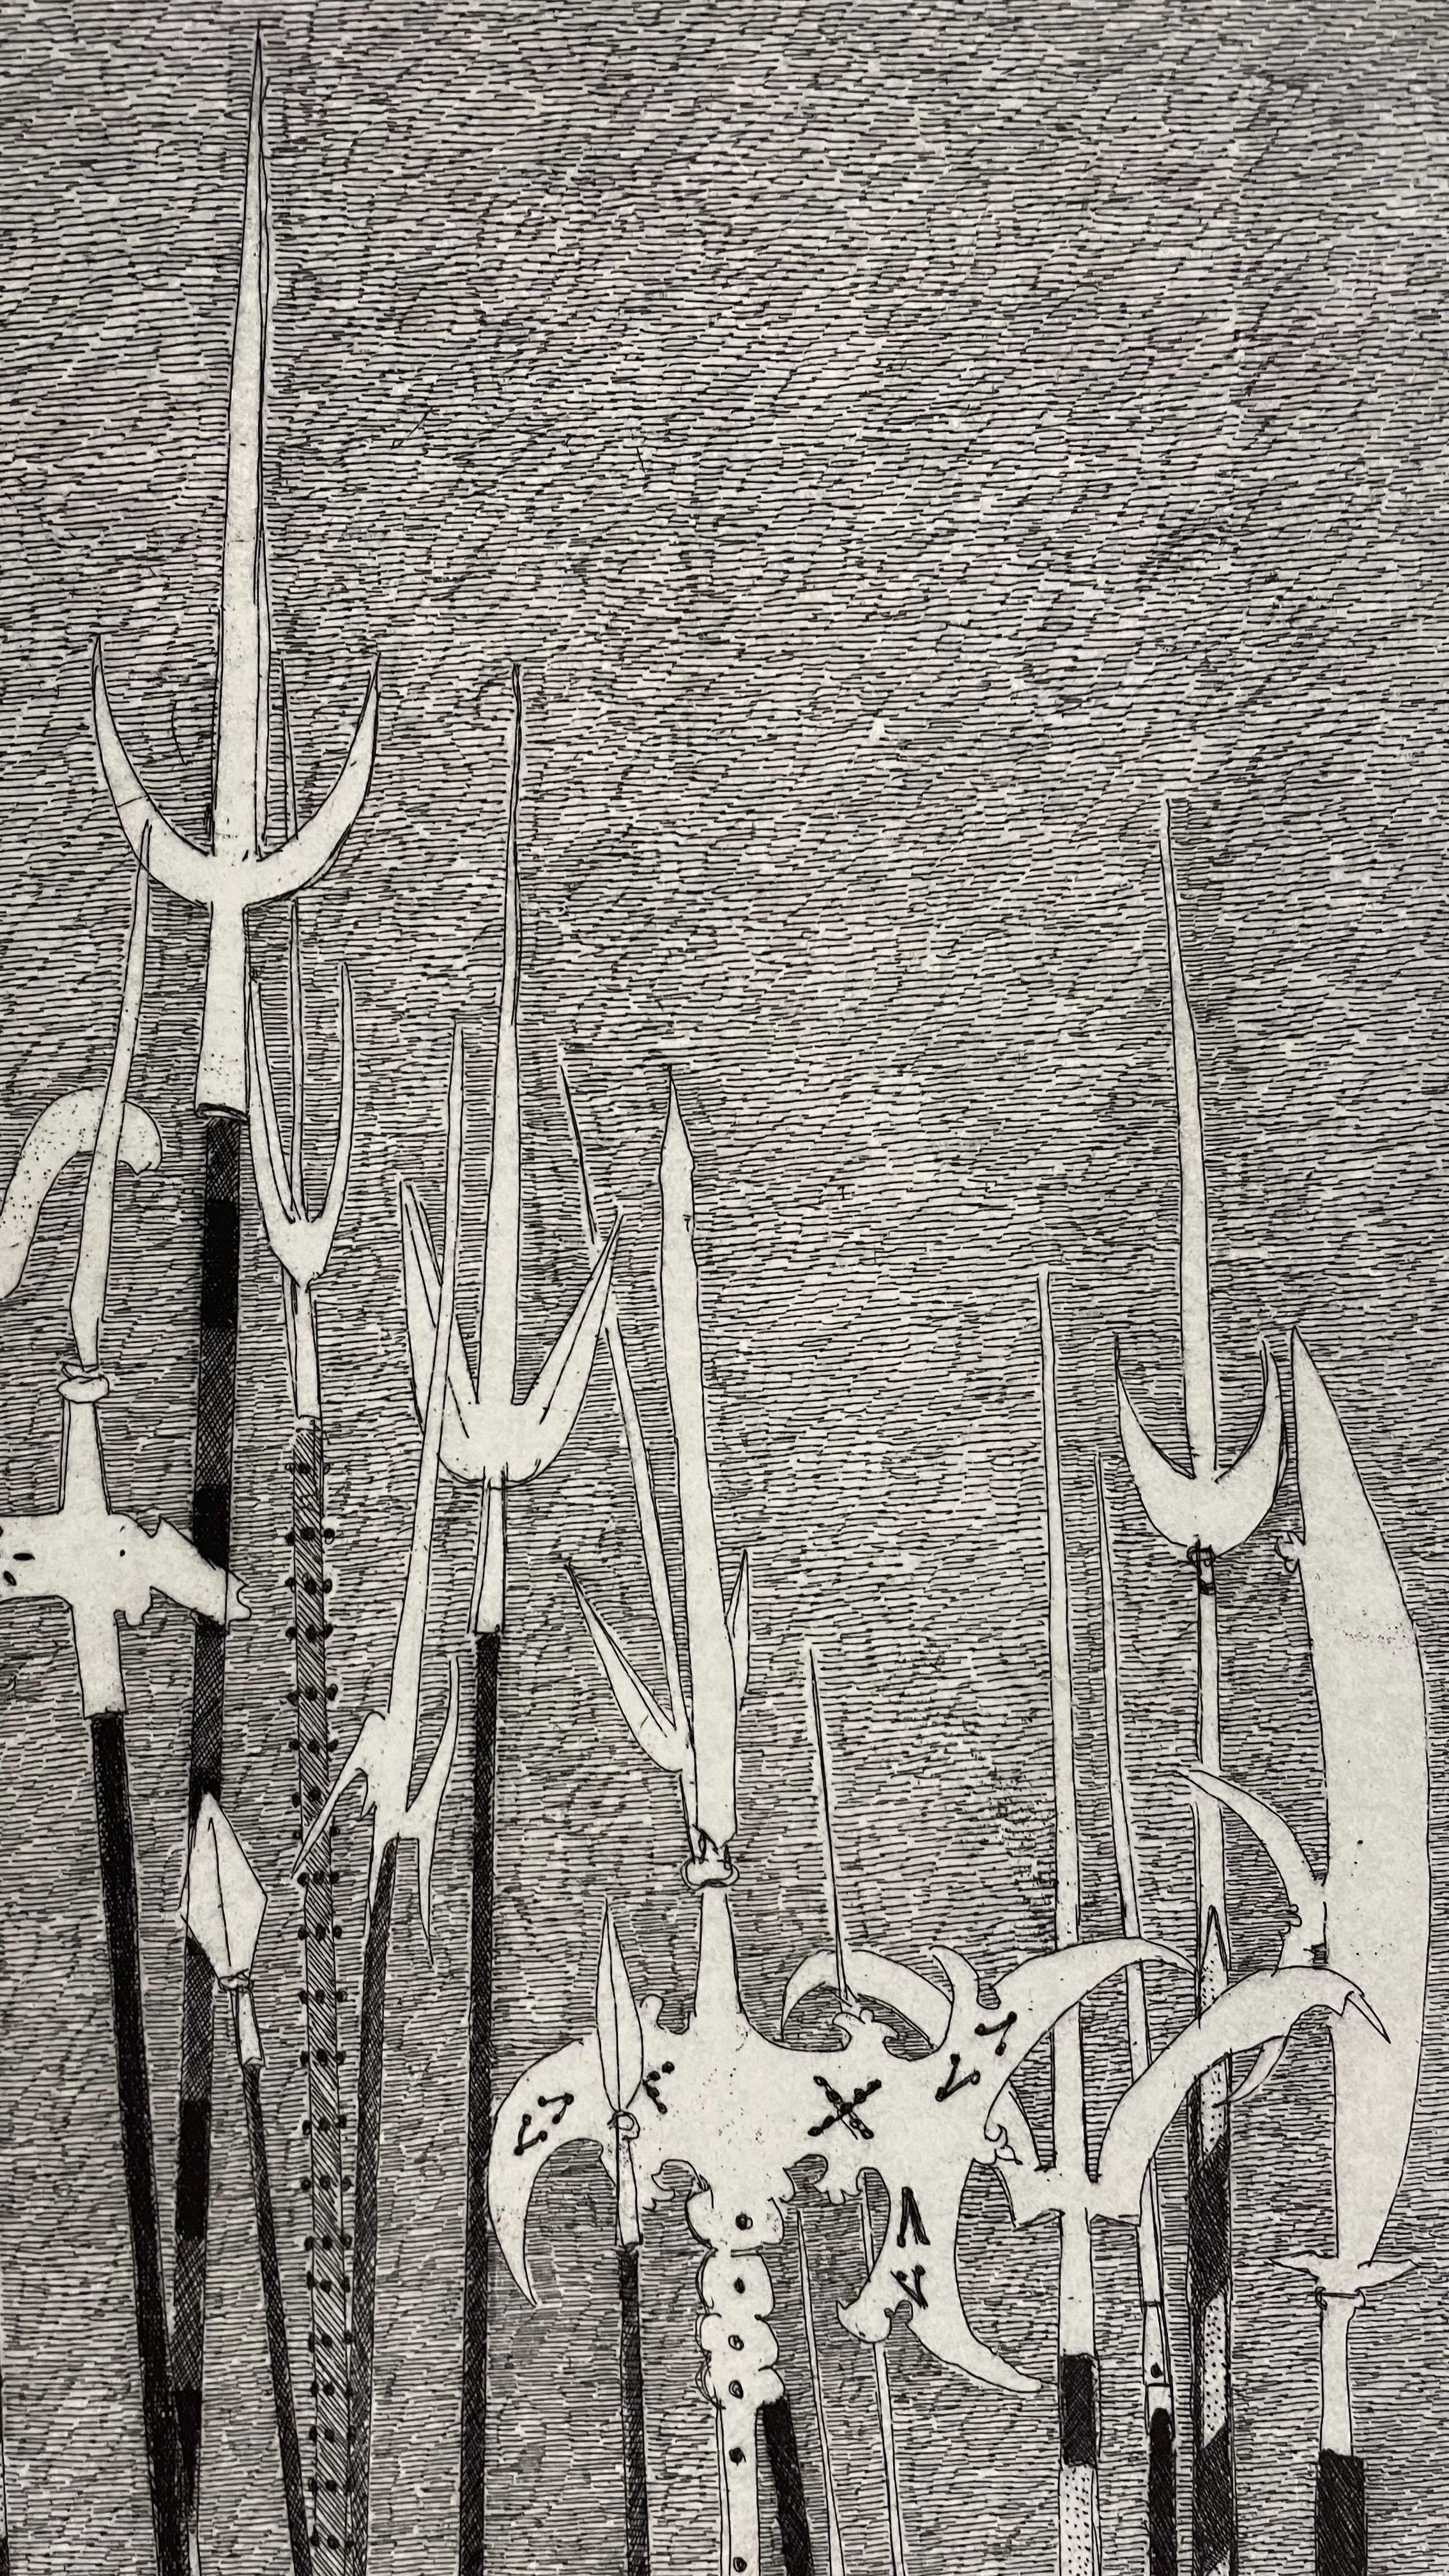 Antique halberds with finely decorated handles arranged on the wooden rack - Print by Federica Galli